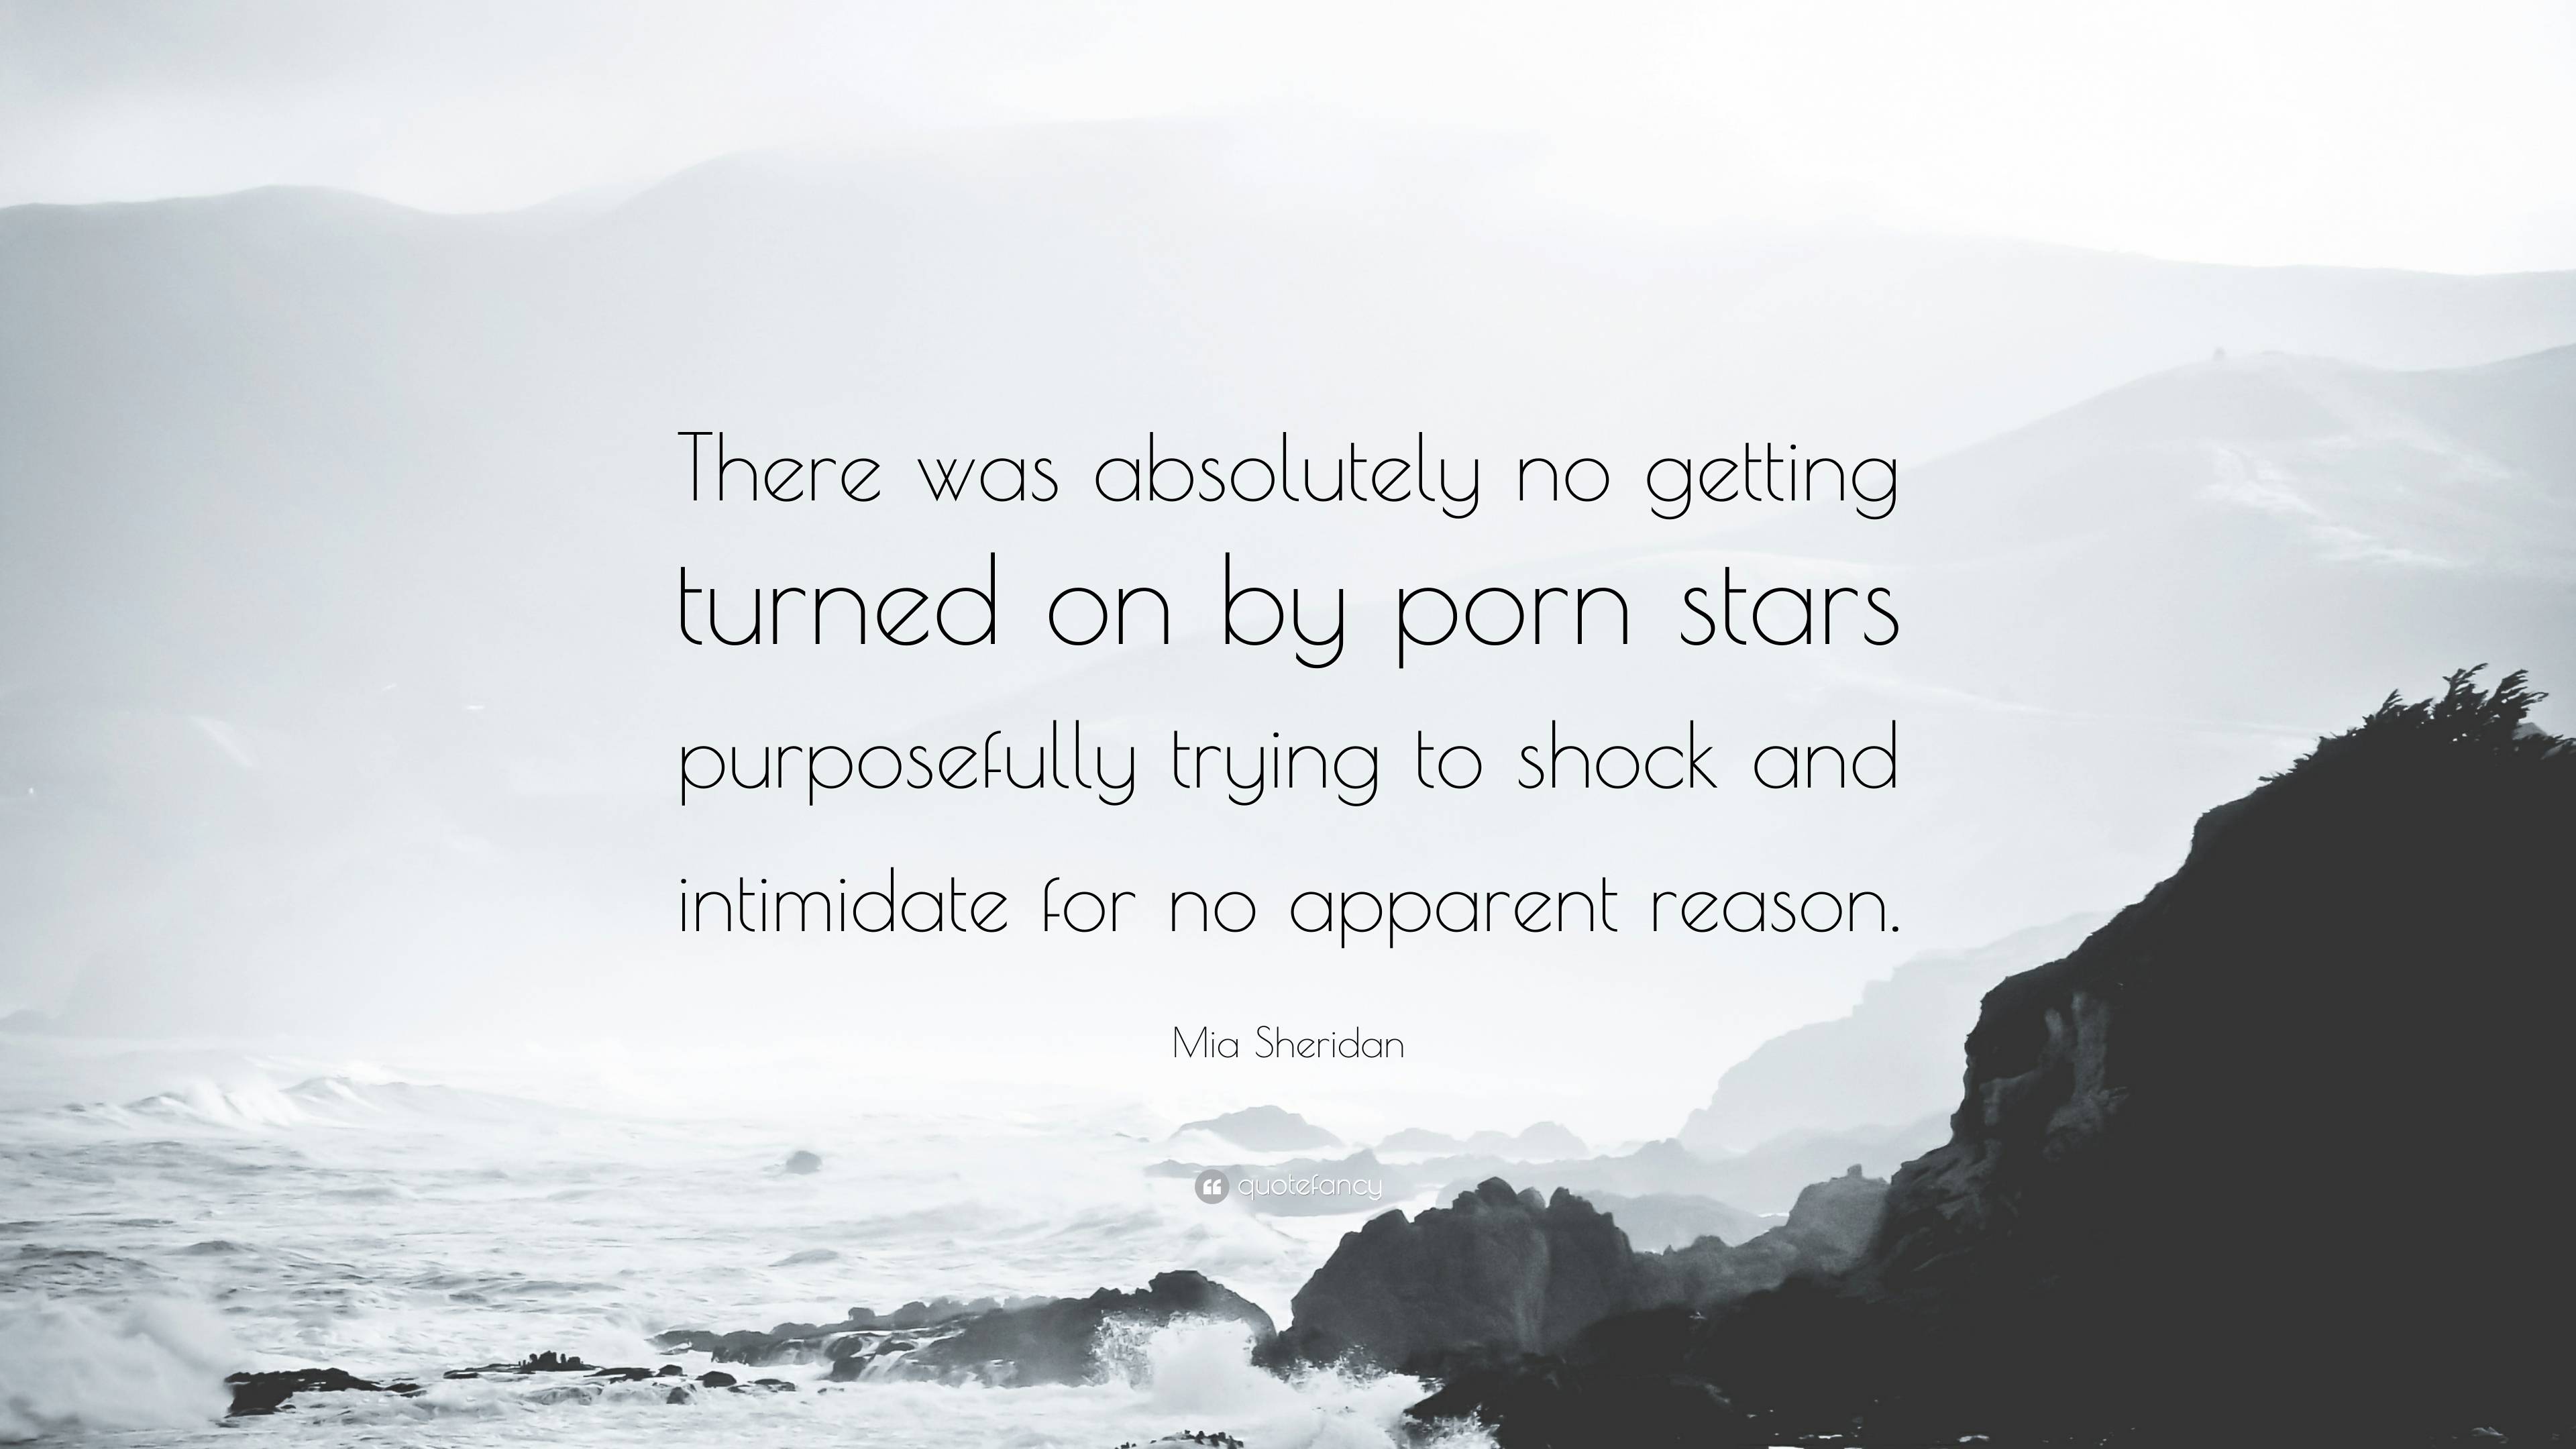 Porn Motivational Memes - Mia Sheridan Quote: â€œThere was absolutely no getting turned on by porn  stars purposefully trying to shock and intimidate for no apparent reas...â€